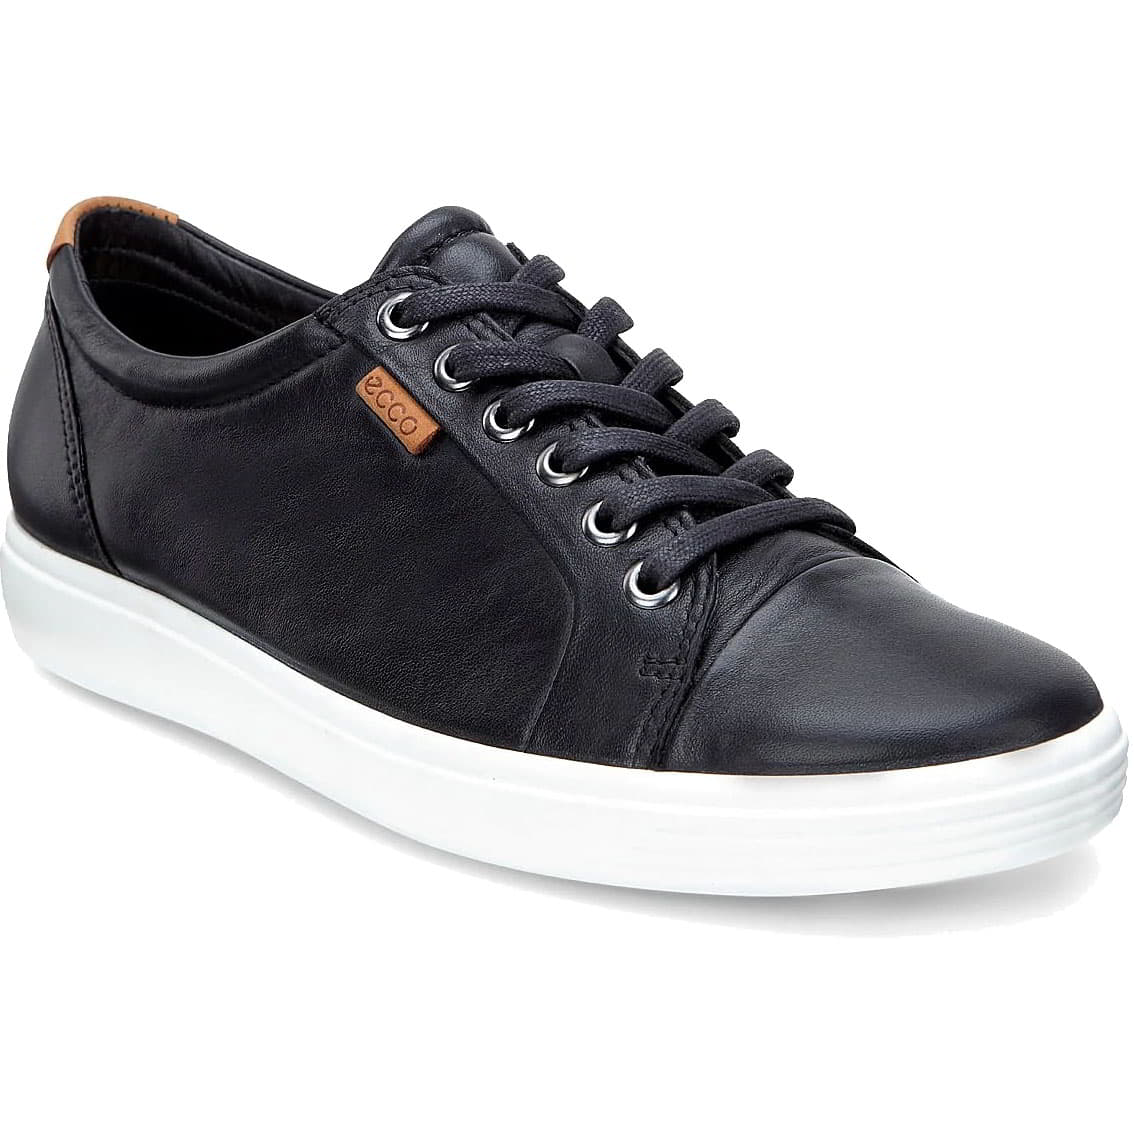 Ecco Women's Soft 7 Leather Trainers - Black